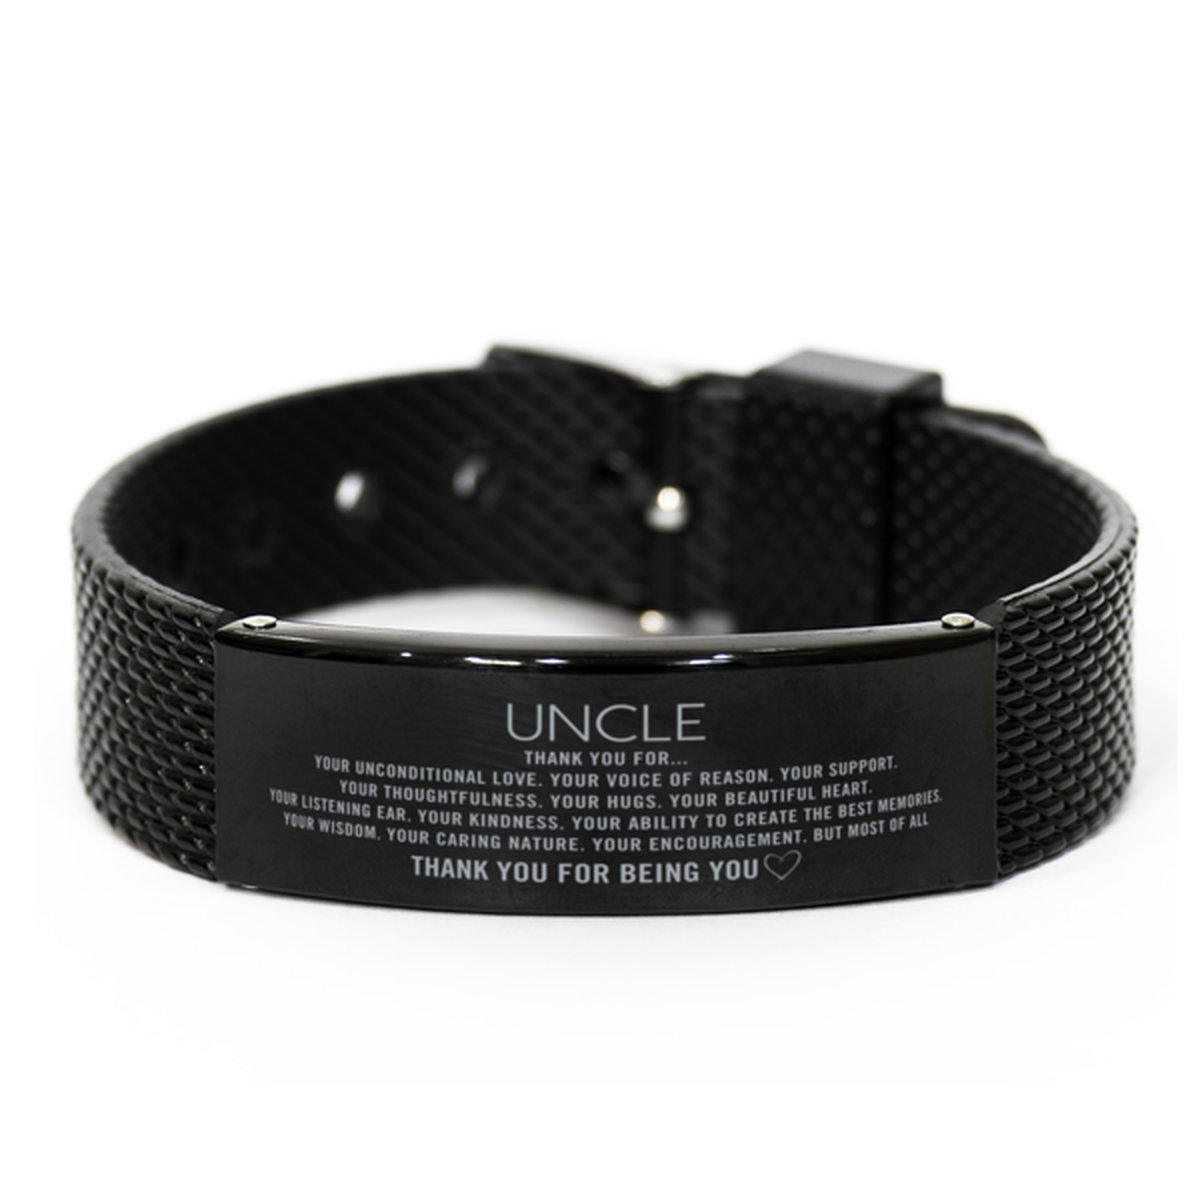 Uncle Black Shark Mesh Bracelet Custom, Engraved Gifts For Uncle Christmas Graduation Birthday Gifts for Men Women Uncle Thank you for Your unconditional love